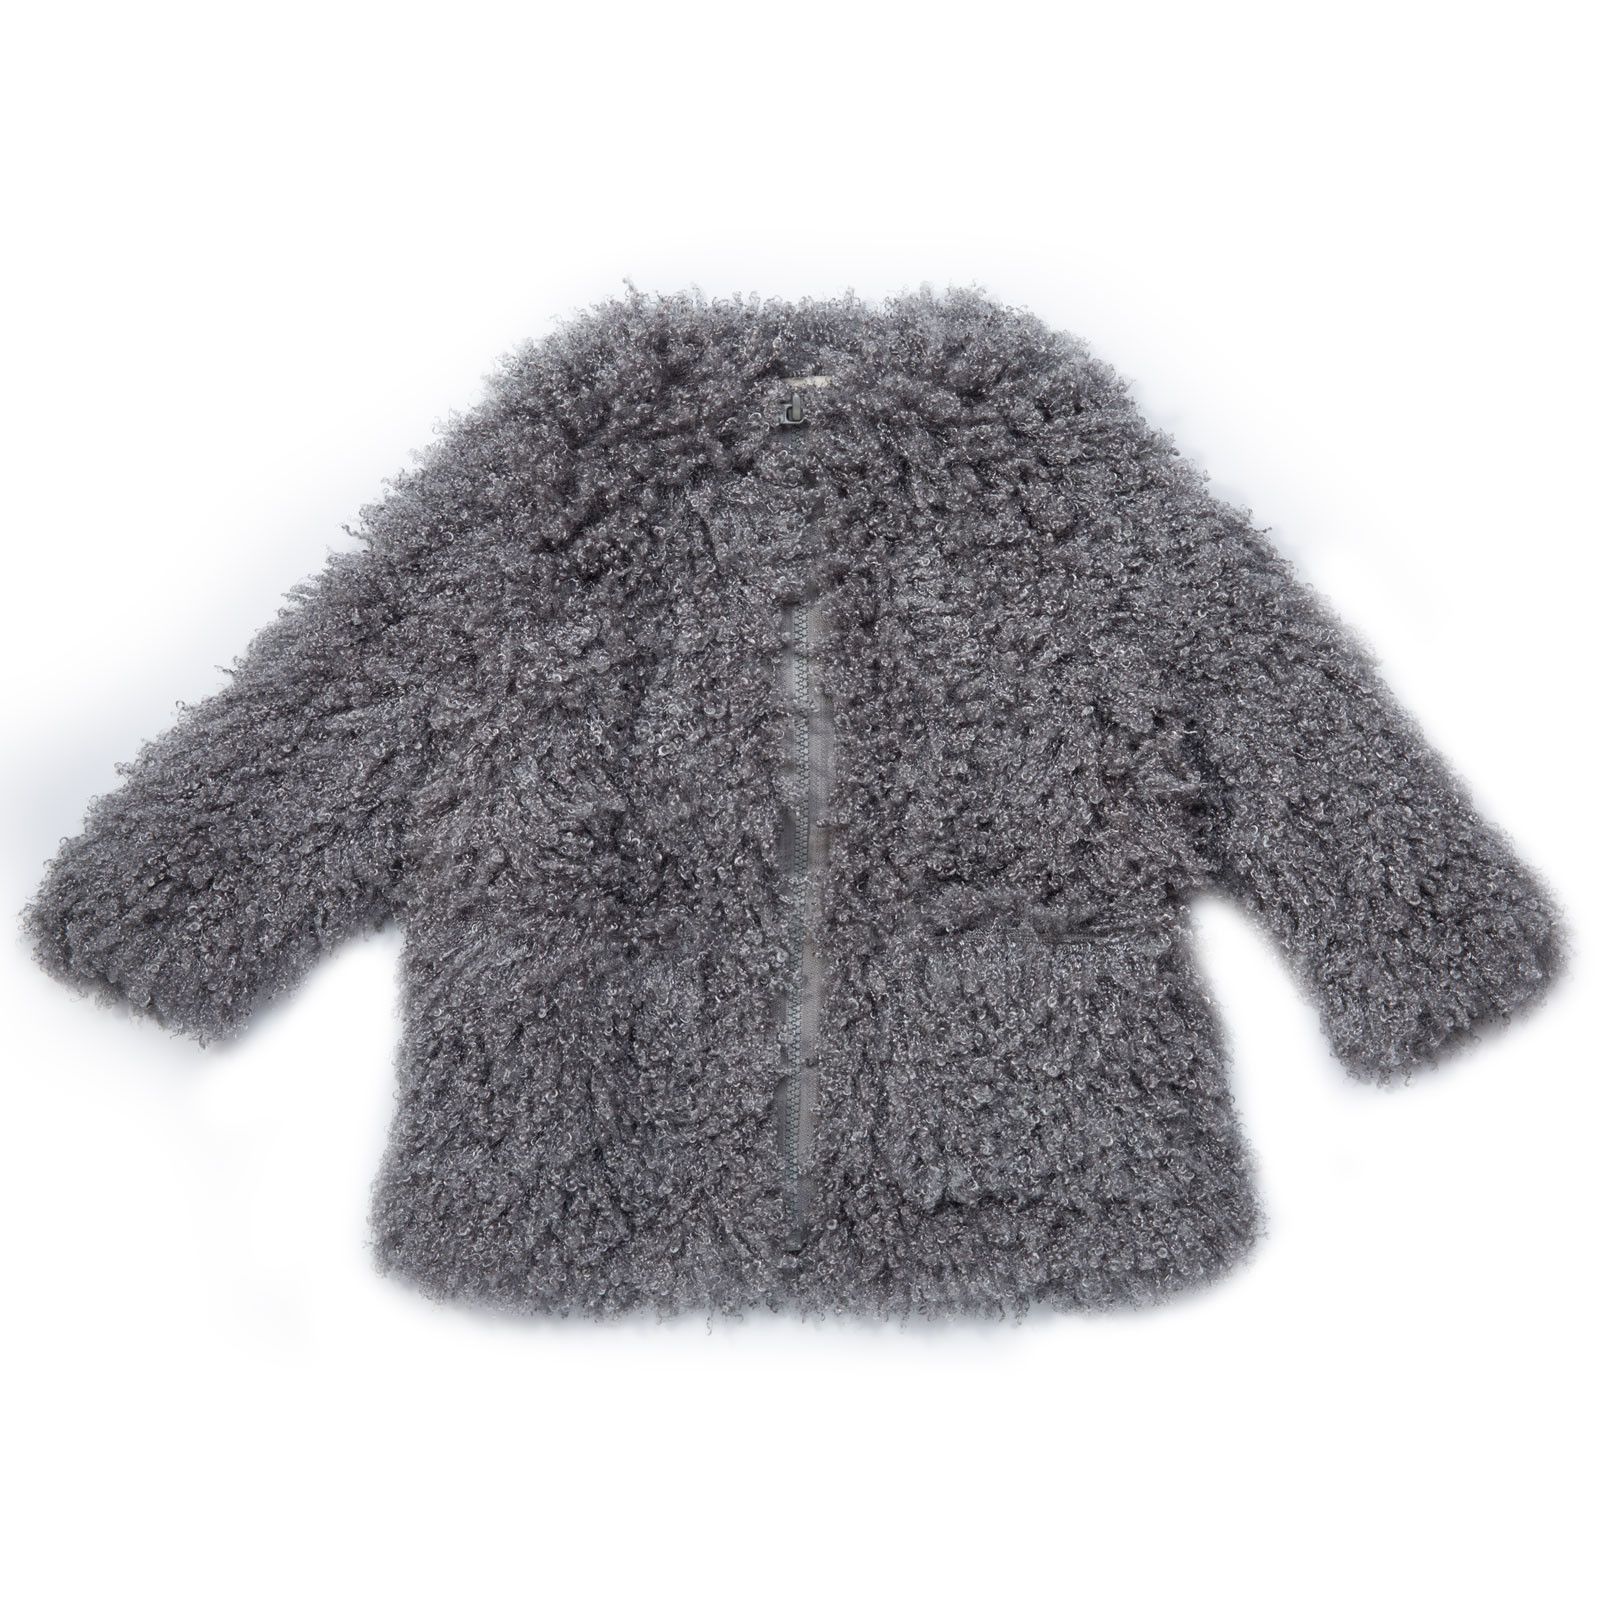 Sparkles Girls Grey Fluffy Coat With Two Pockets - CÉMAROSE | Children's Fashion Store - 1